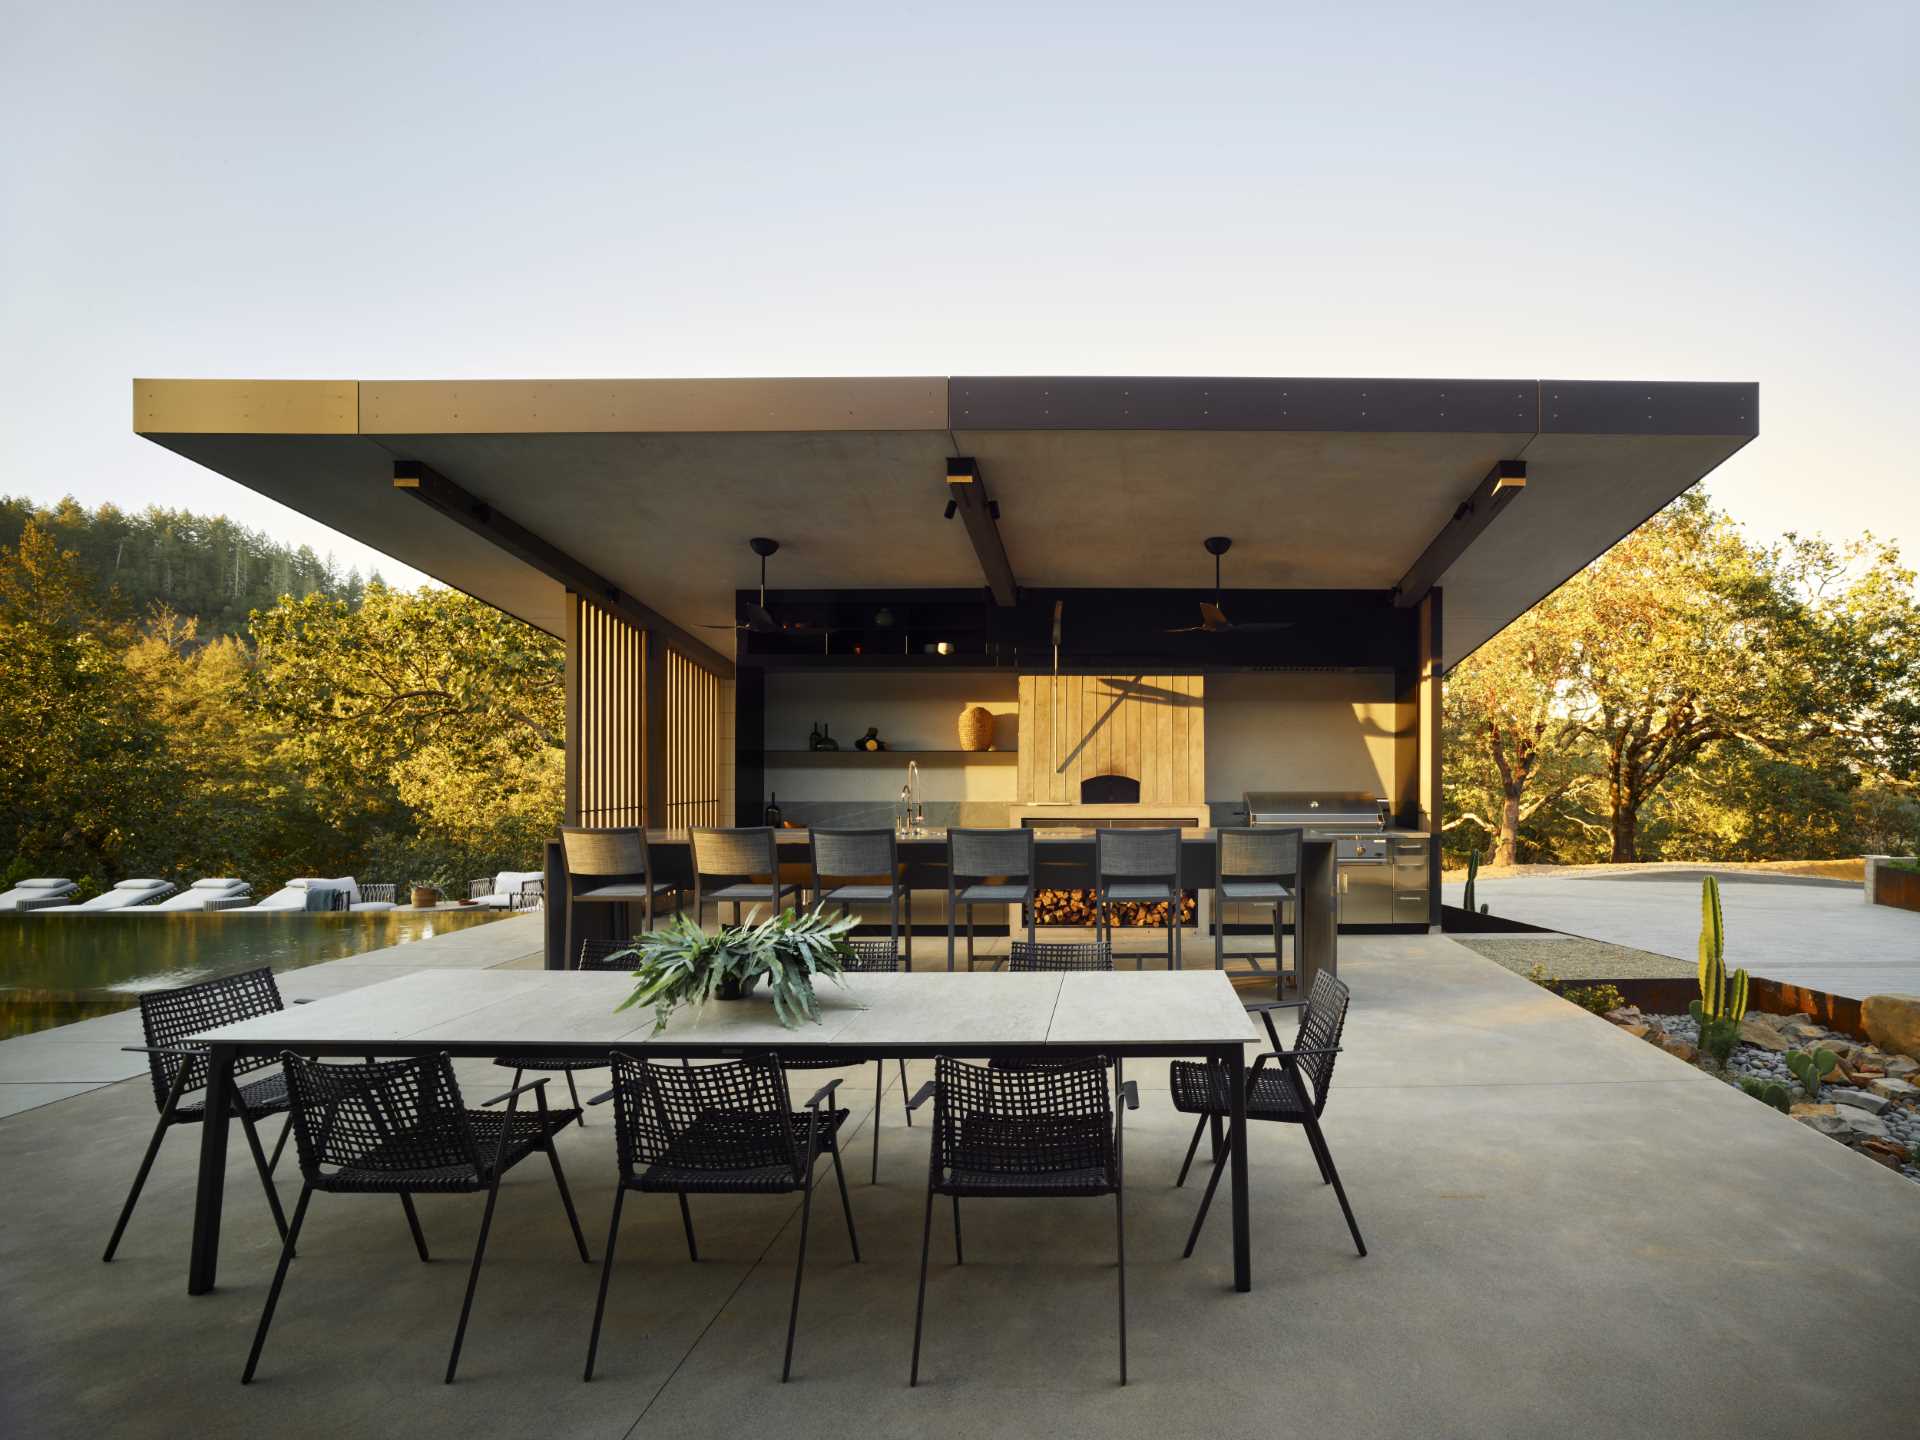 A modern ،me with a pitched ceiling, exposed wood beams, and expansive outdoor living ،es.